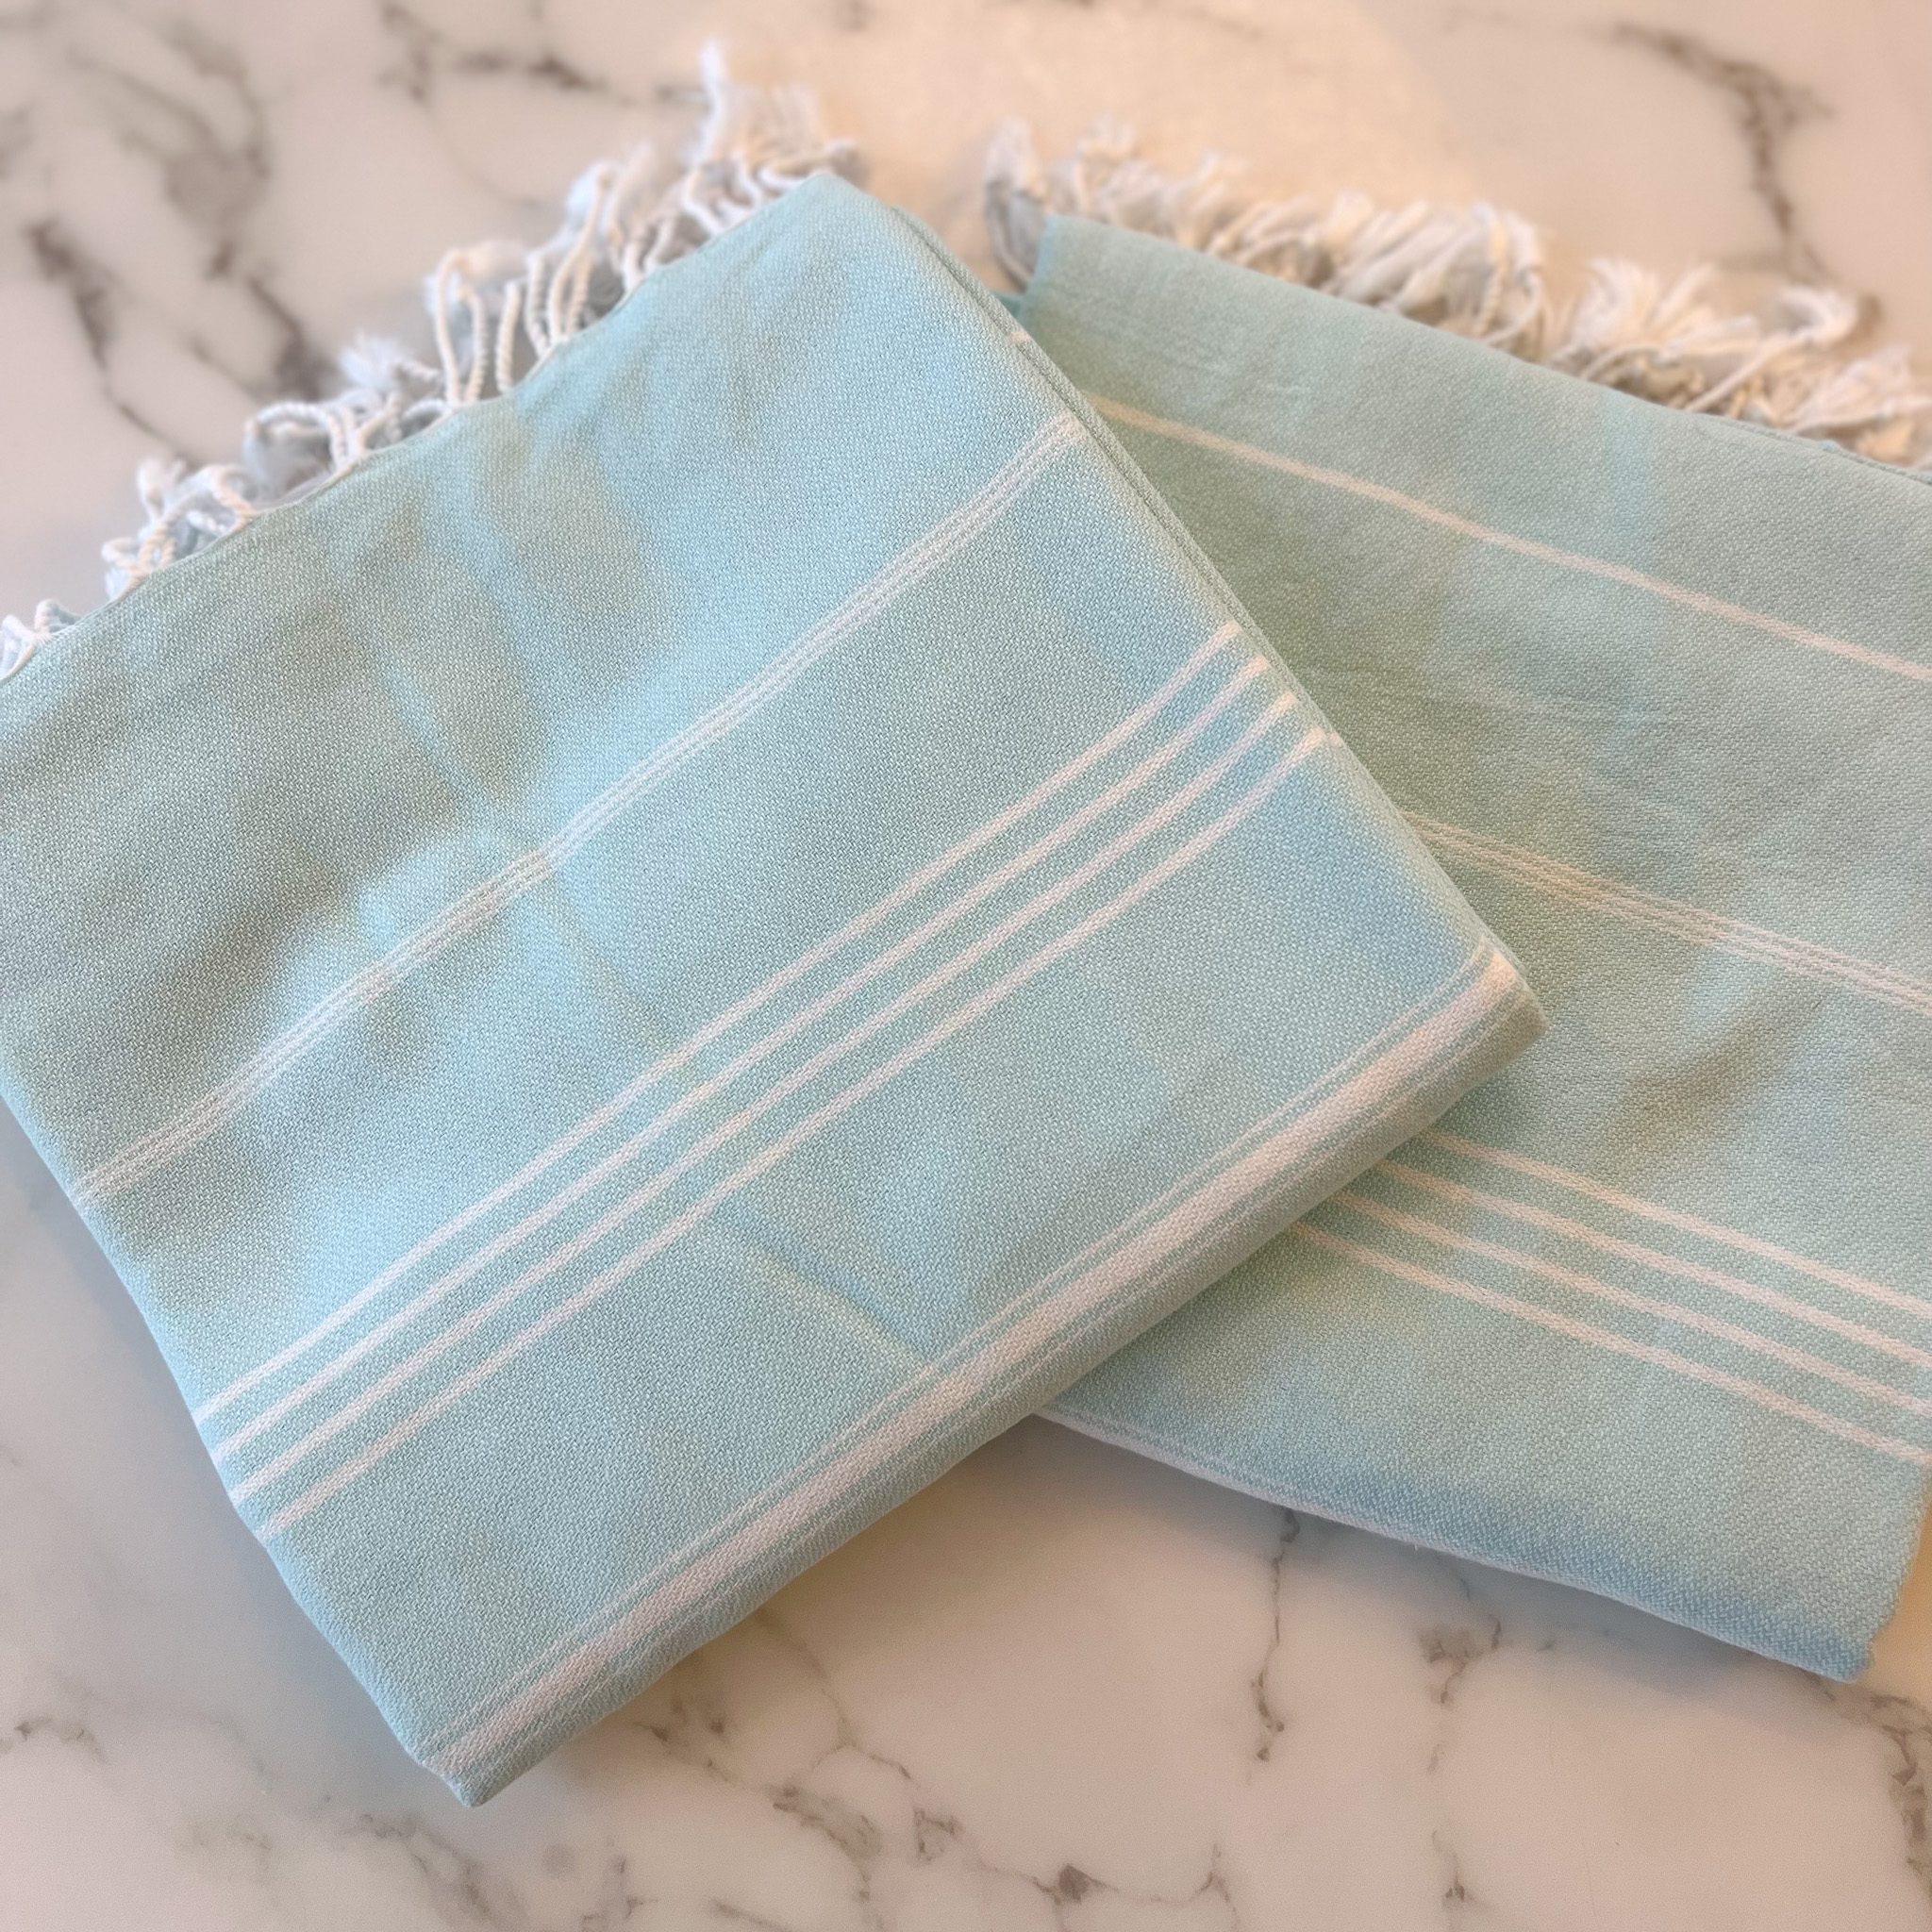 turkish-beach-towels-from-amazon